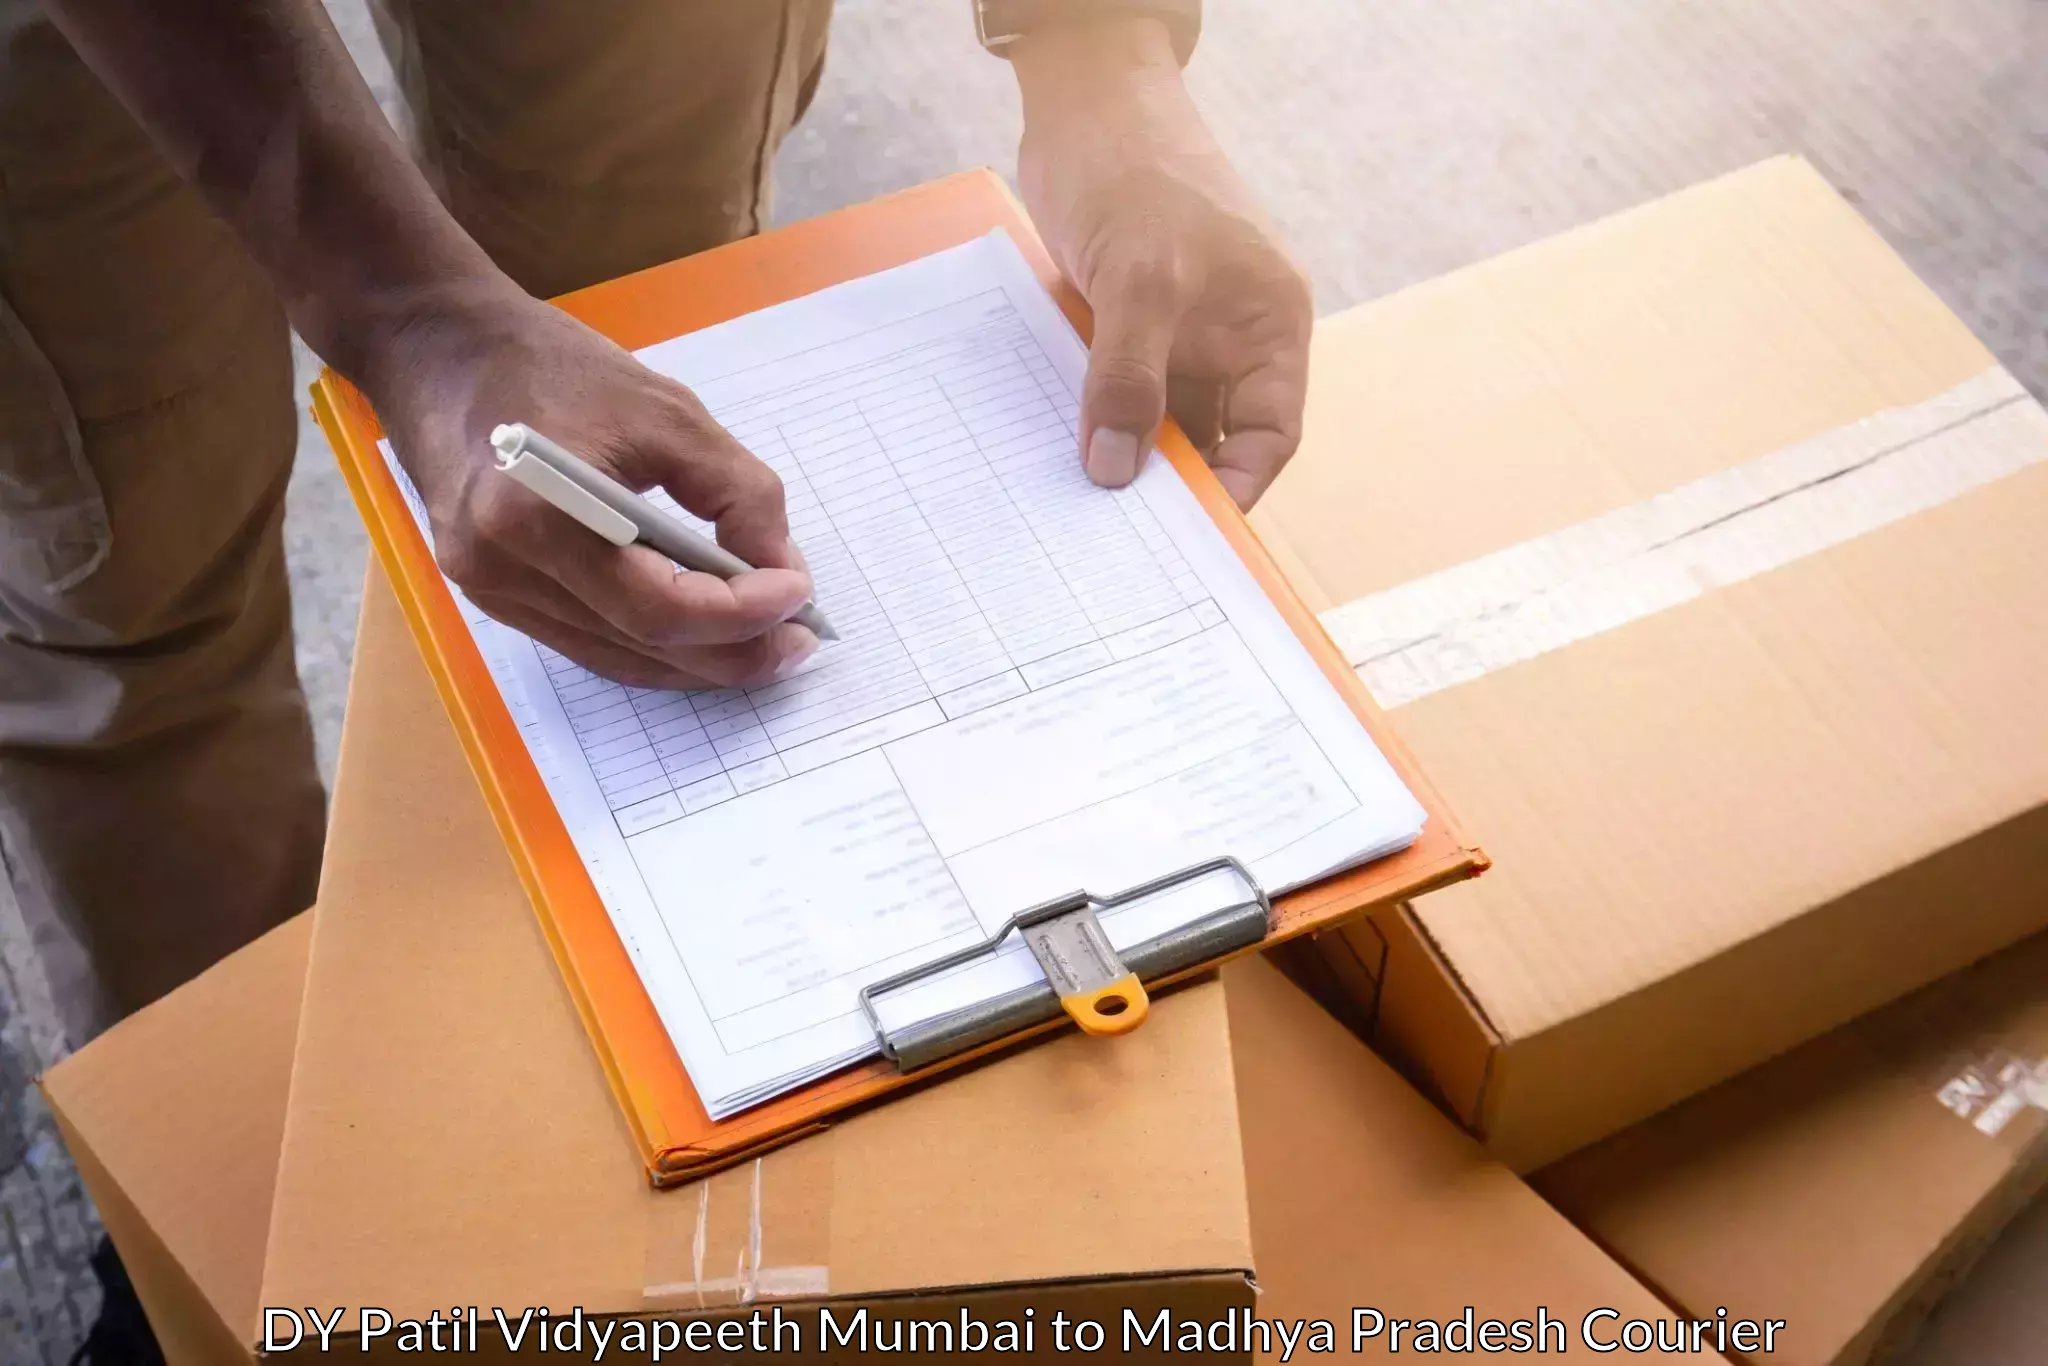 Same-day delivery solutions DY Patil Vidyapeeth Mumbai to Chand Chaurai